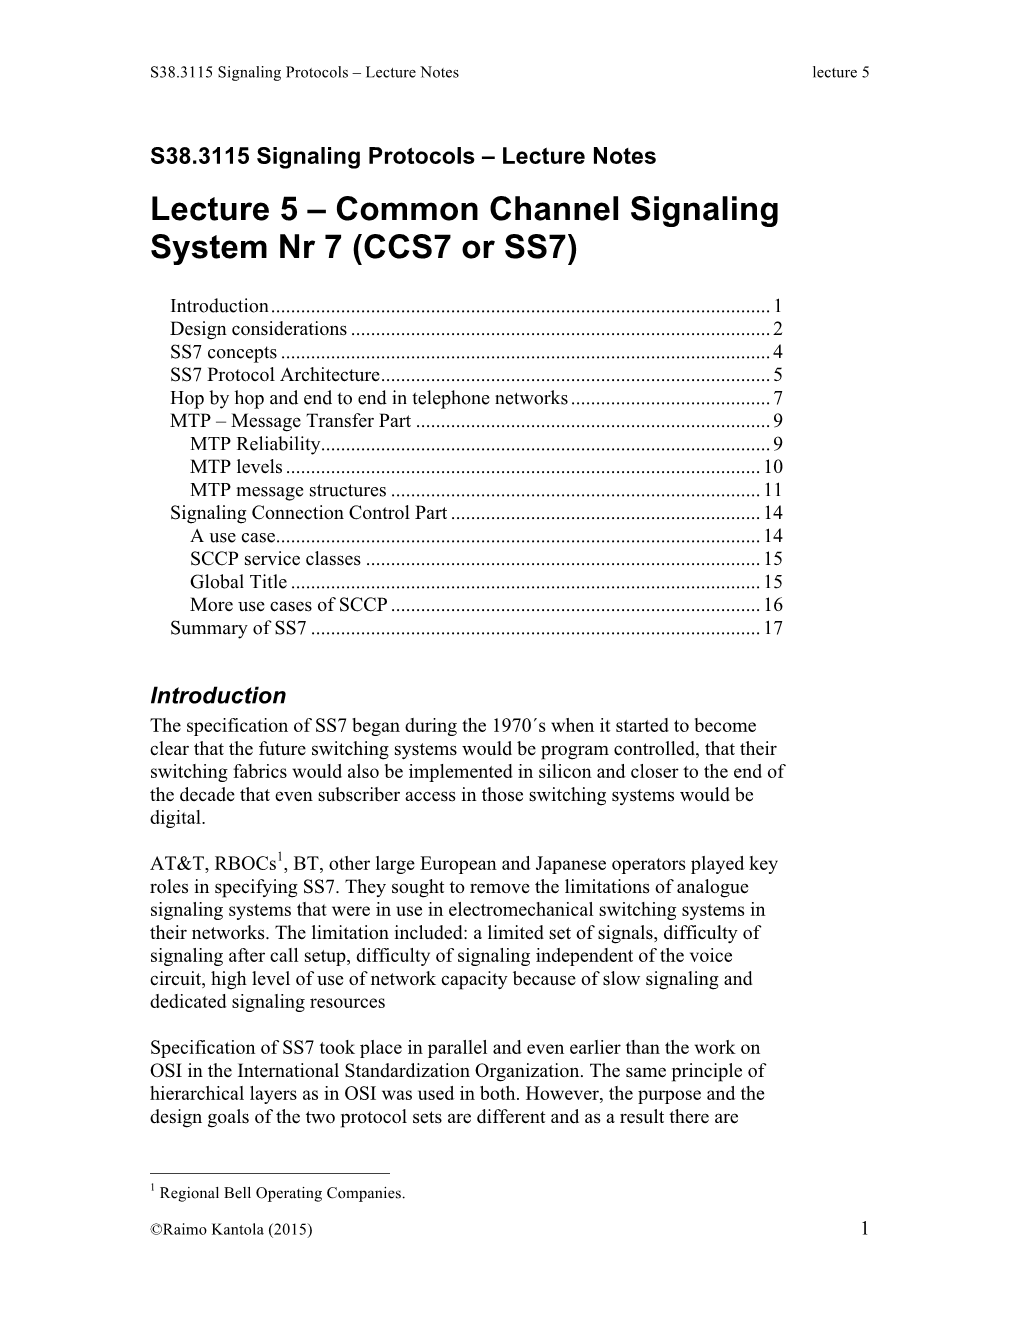 Lecture 5 – Common Channel Signaling System Nr 7 (CCS7 Or SS7)